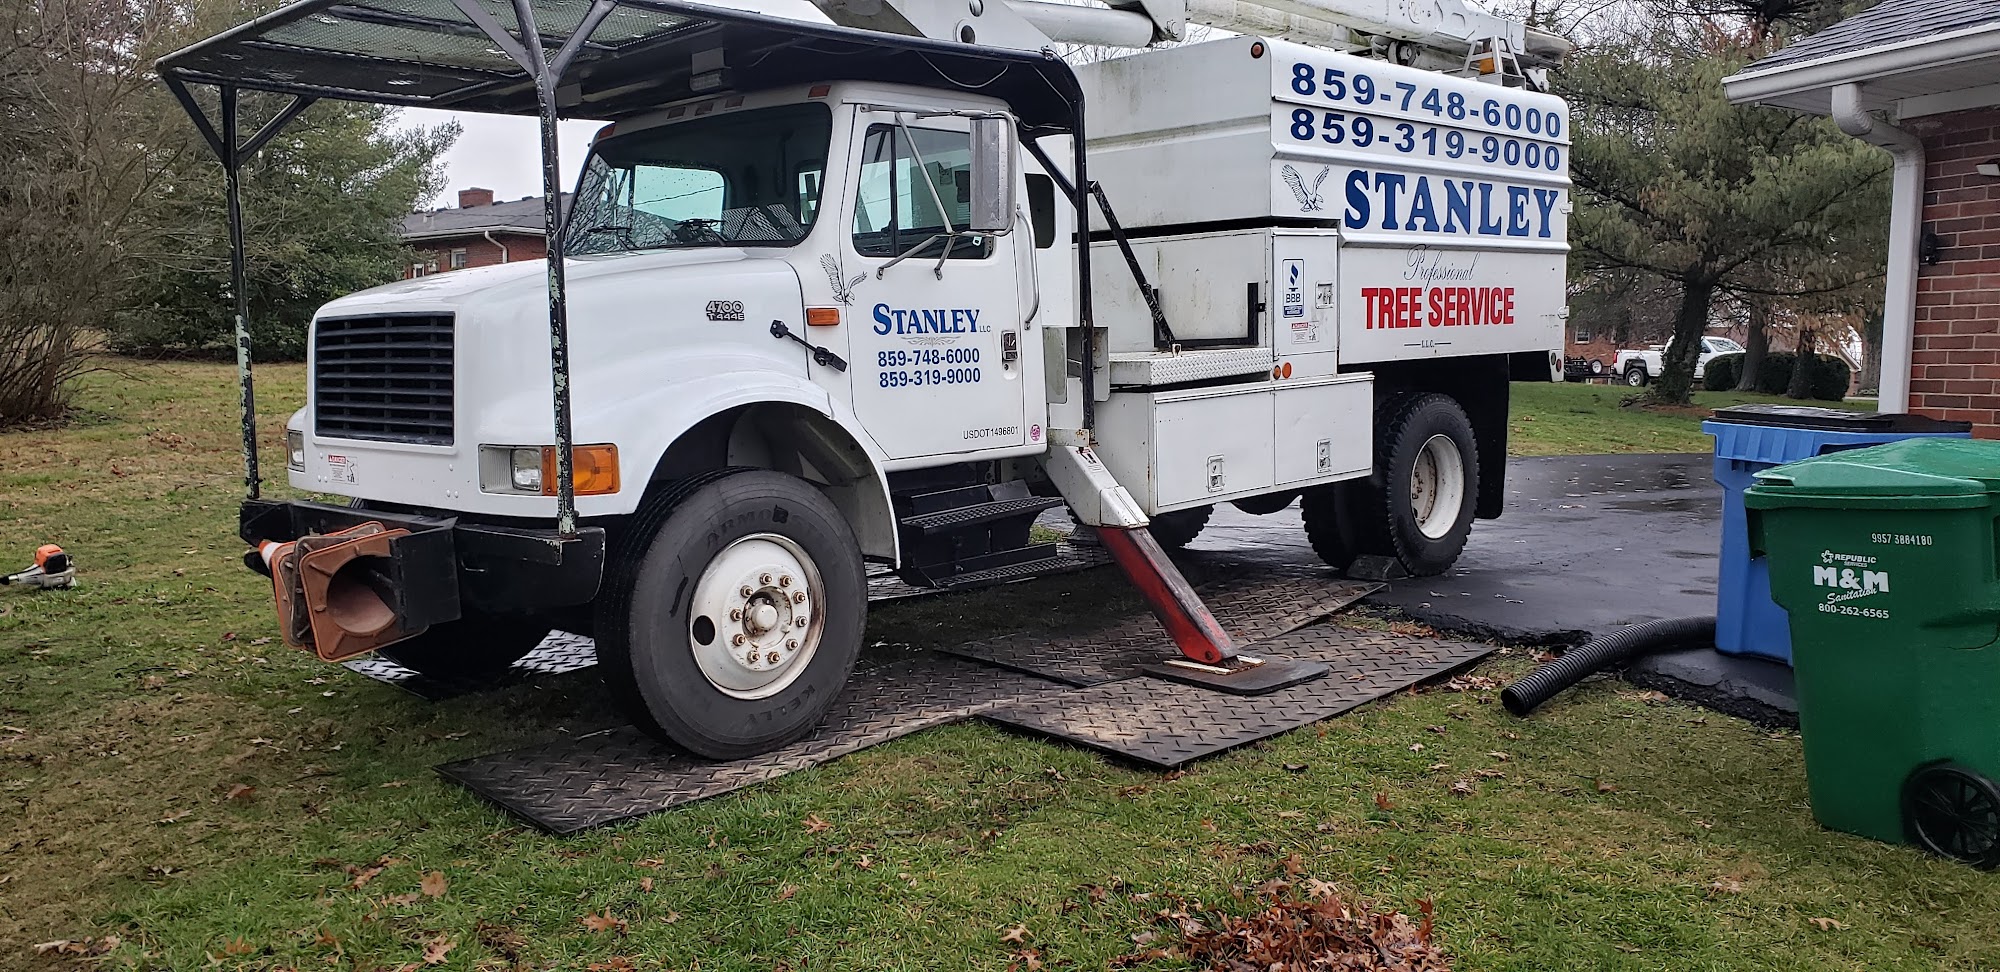 Stanley Professional Tree Service 165 Normans Camp Rd, Harrodsburg Kentucky 40330